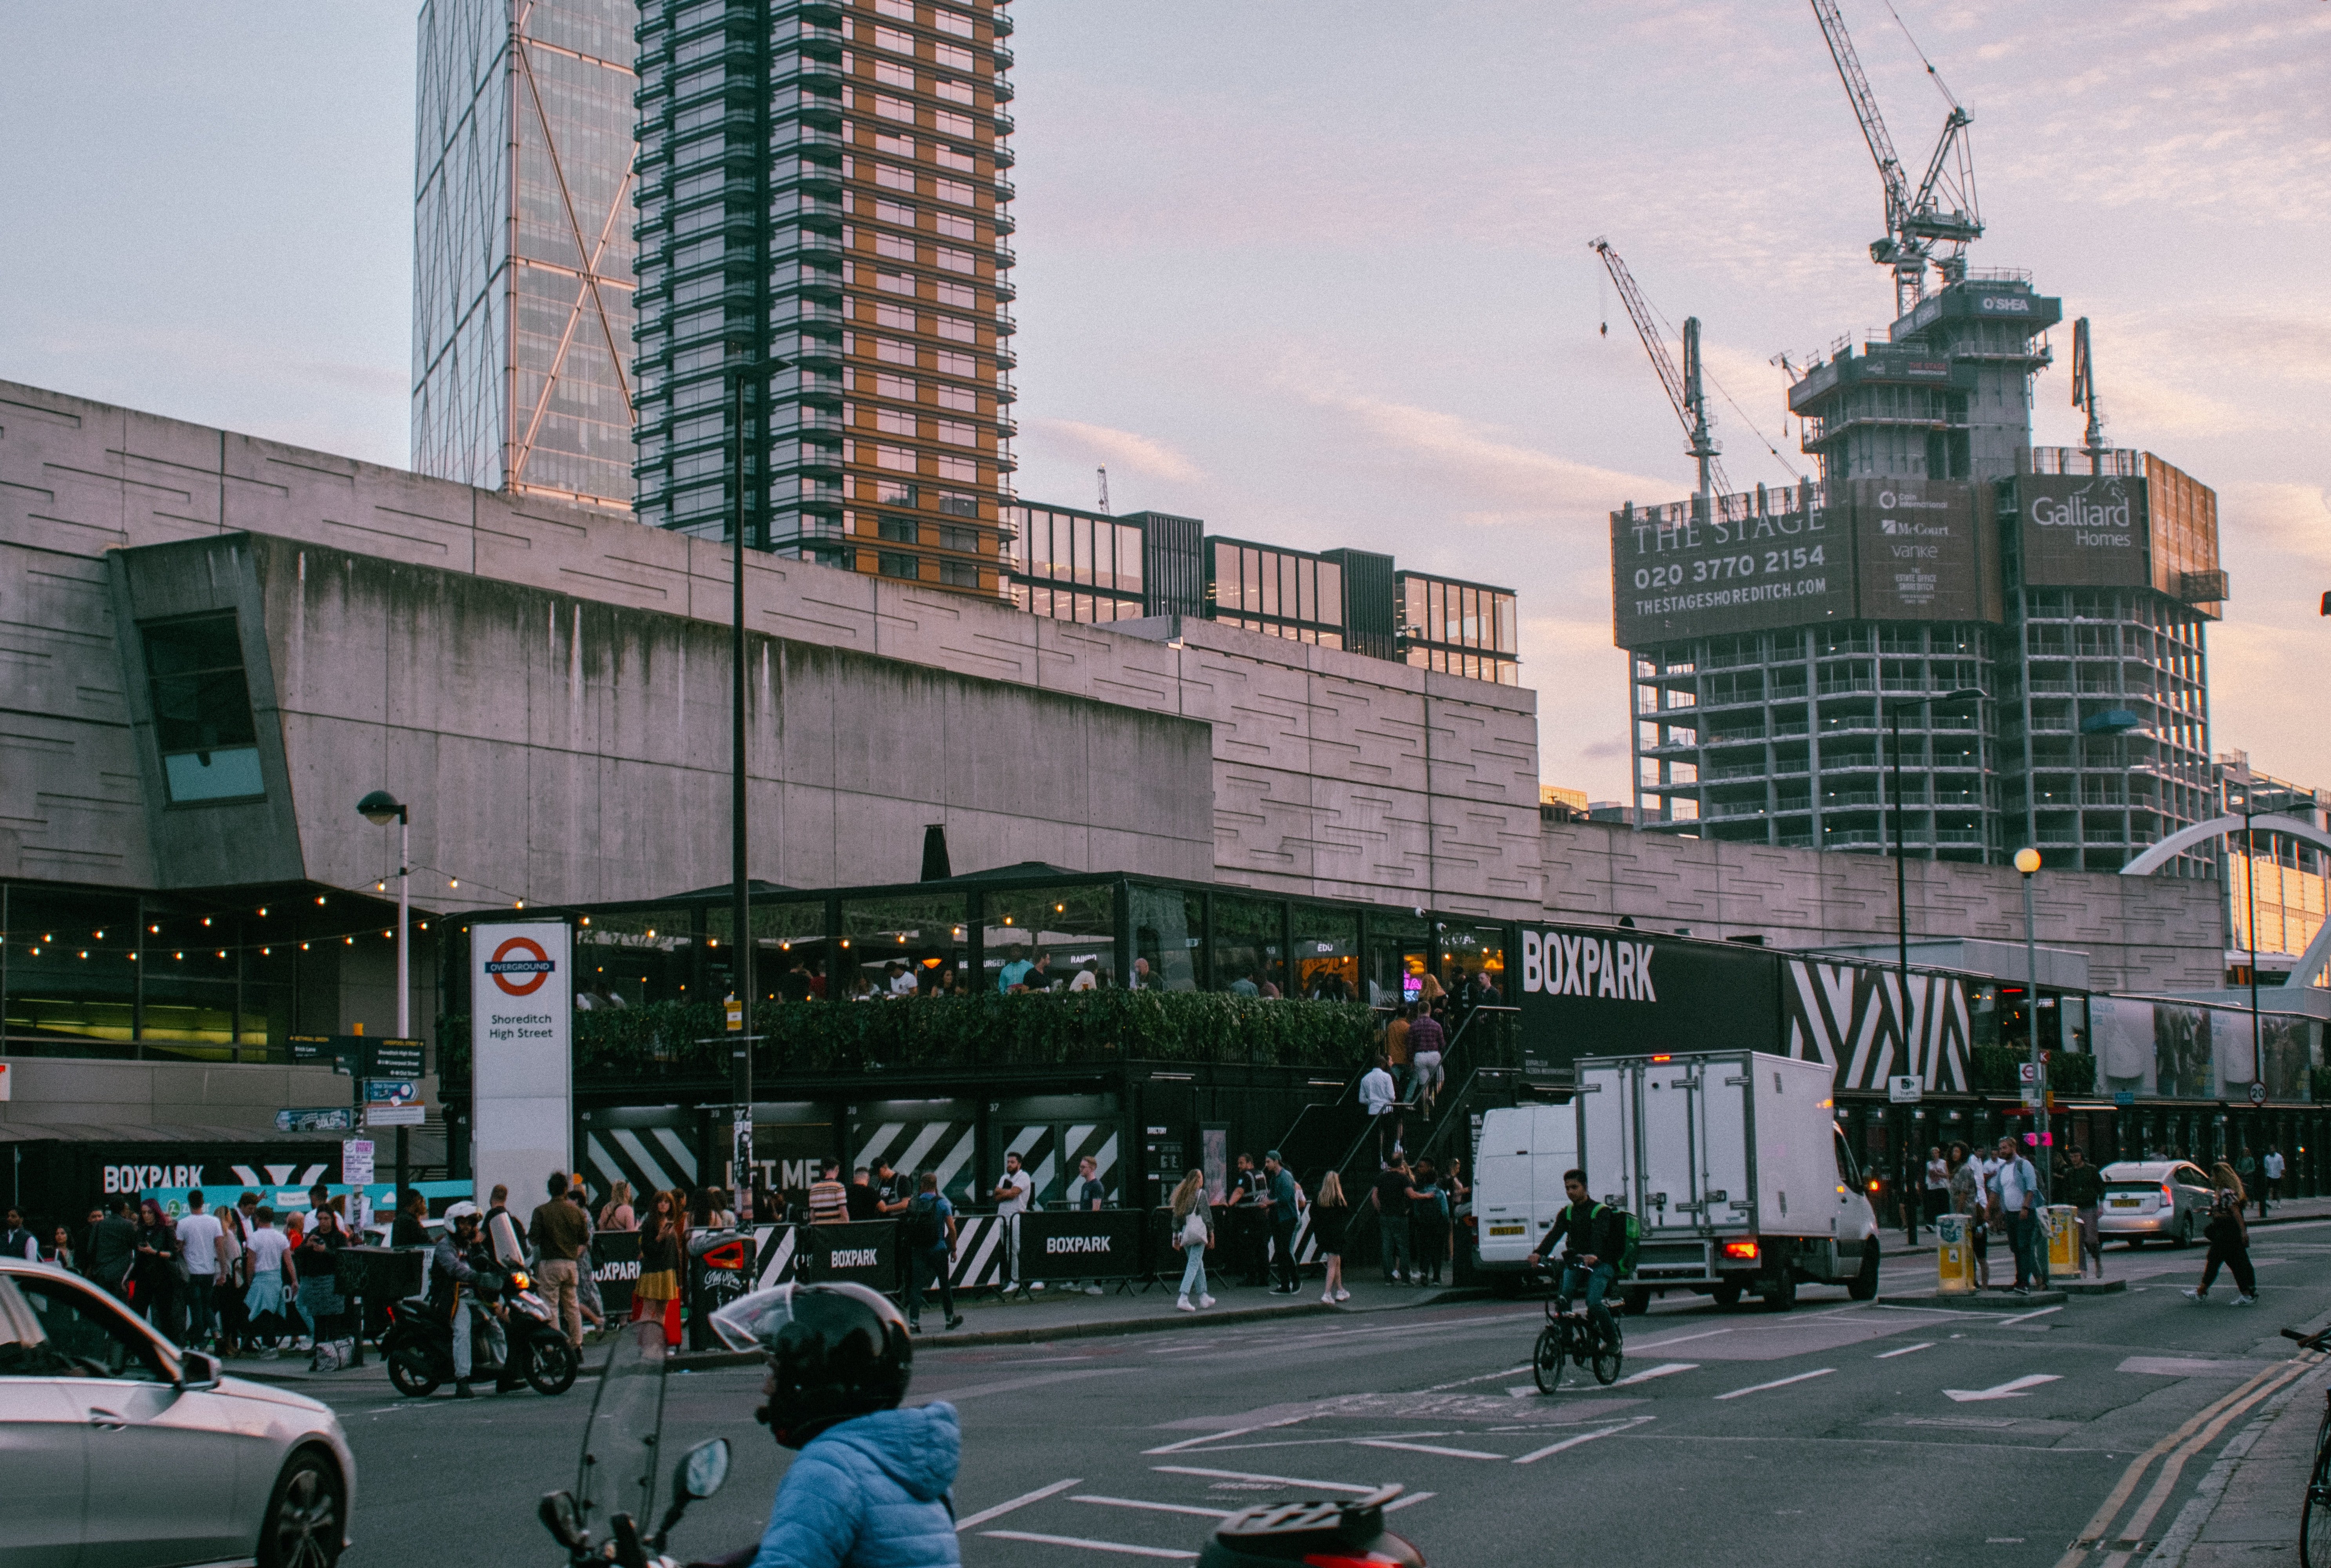 Focus on Local: A Small Business Shopping Guide to Shoreditch